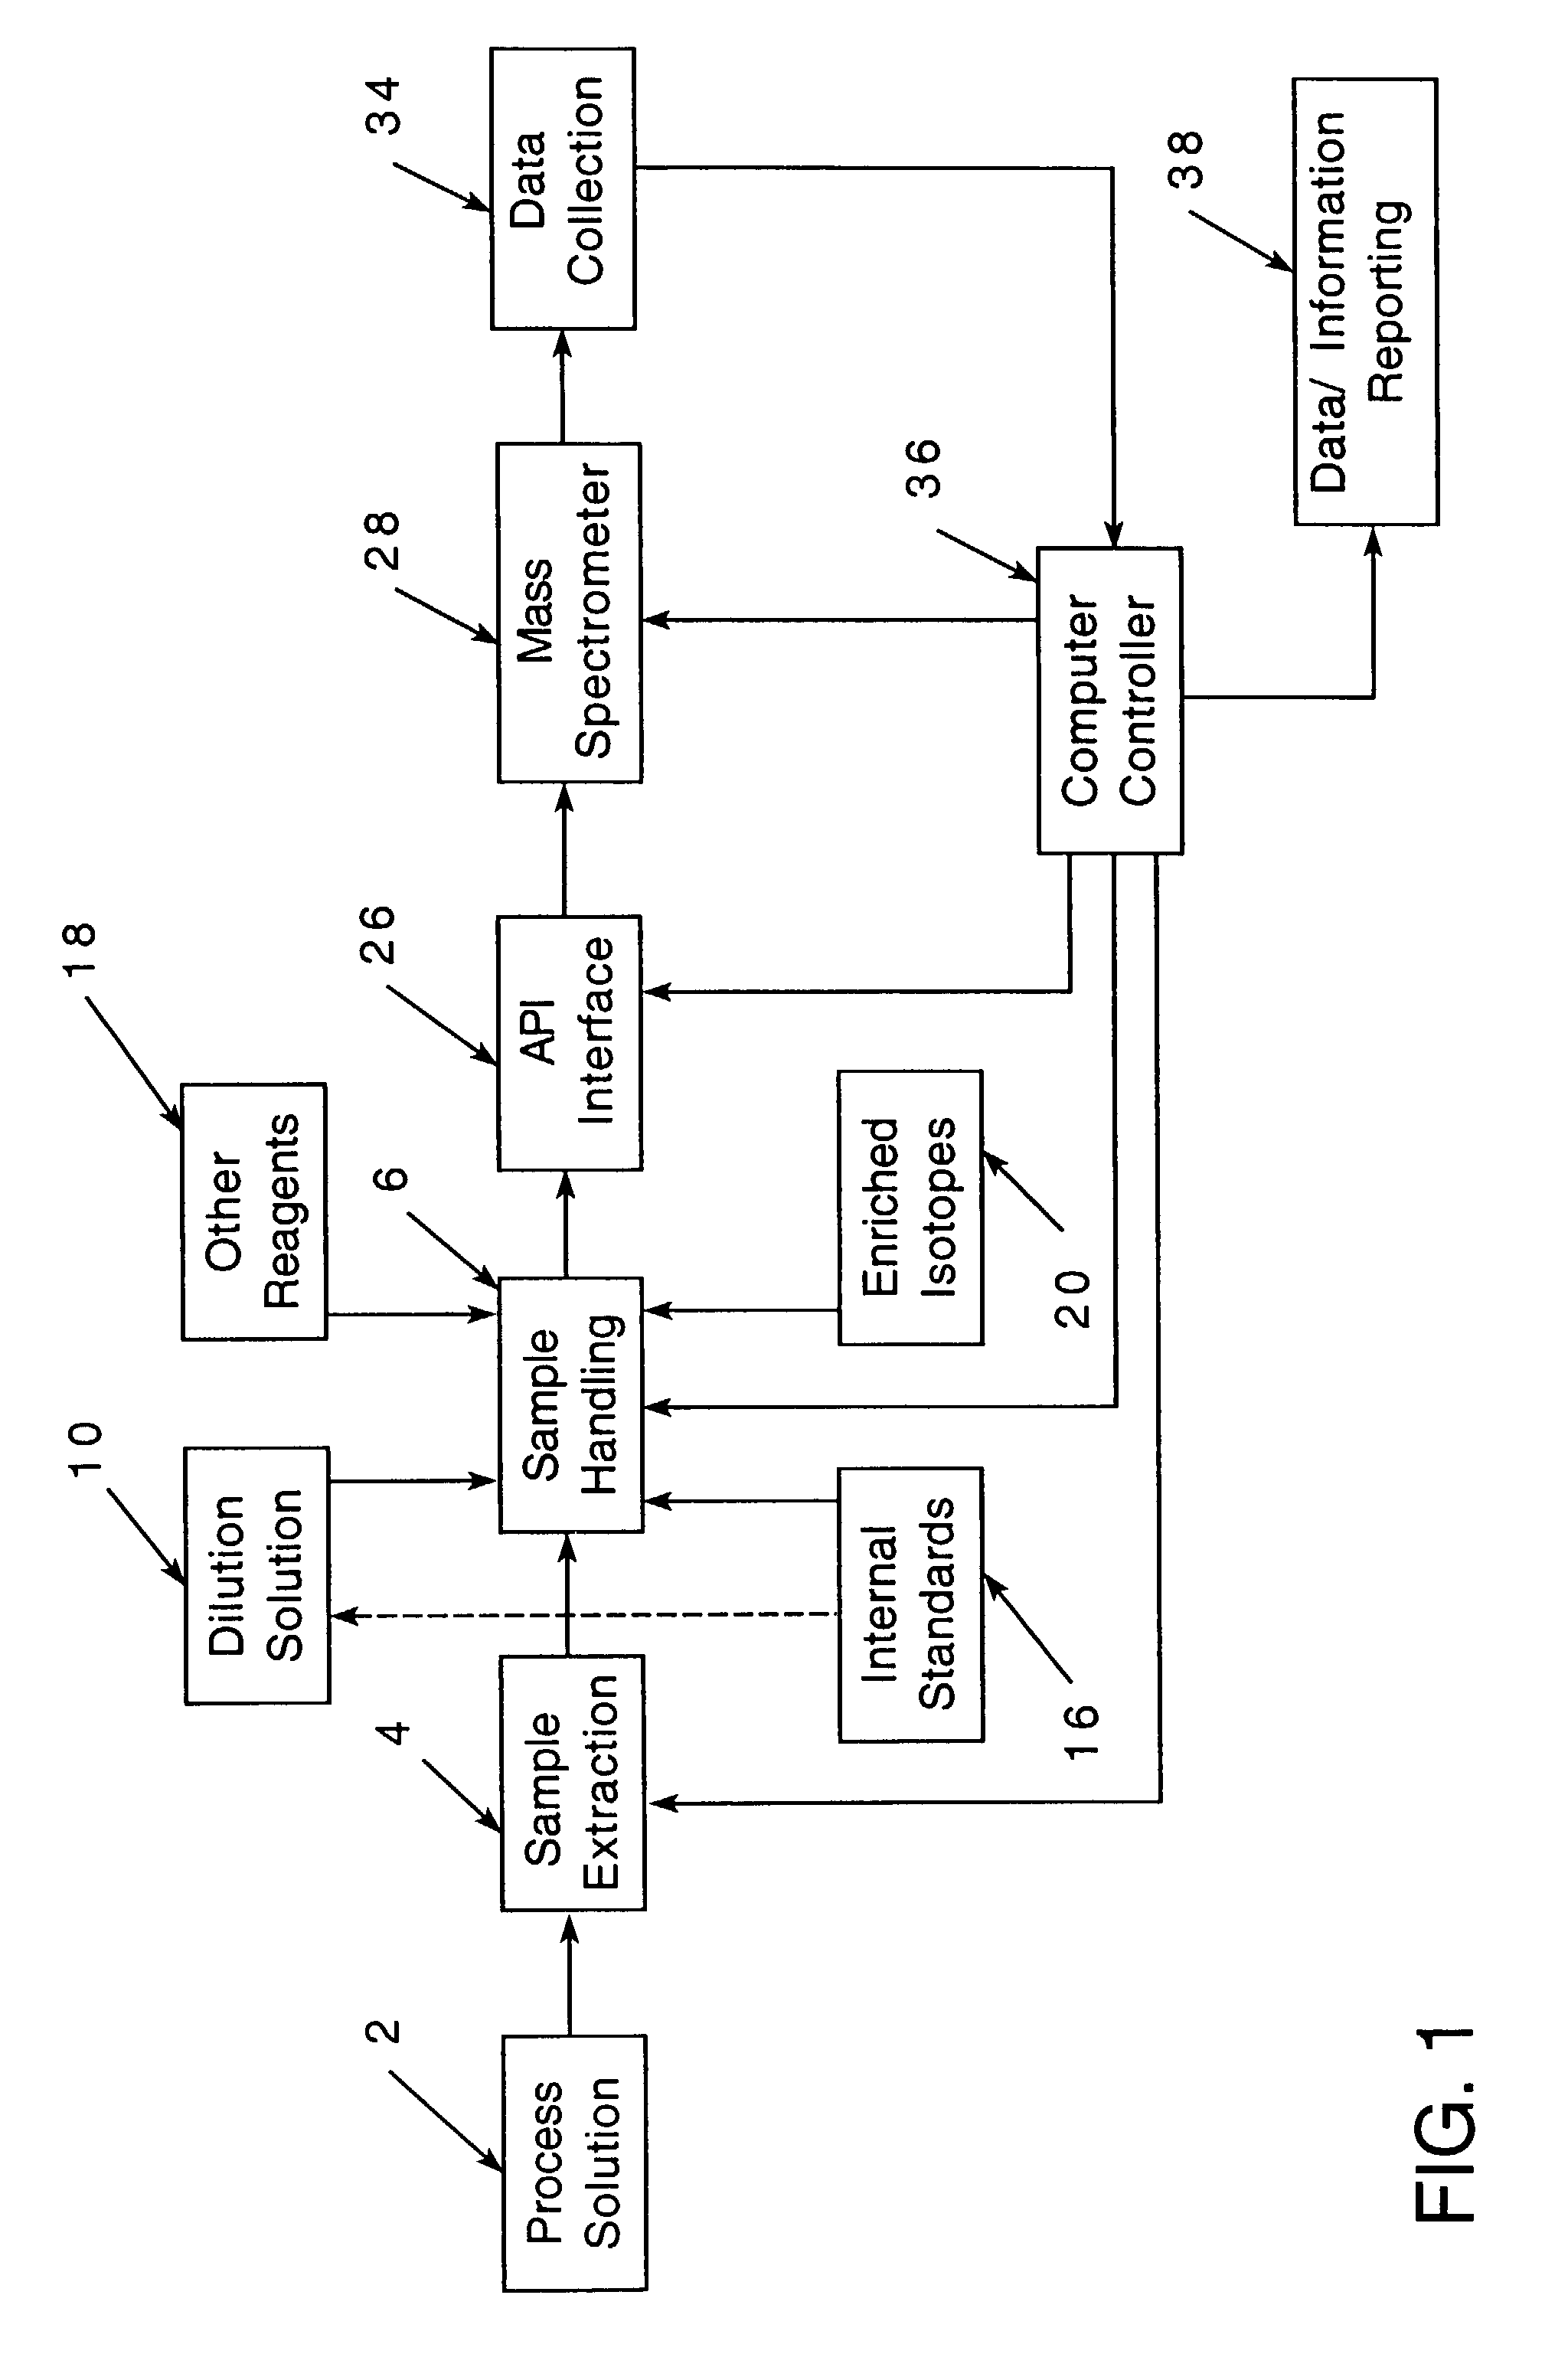 Method and apparatus for automated analysis and characterization of chemical constituents of process solutions